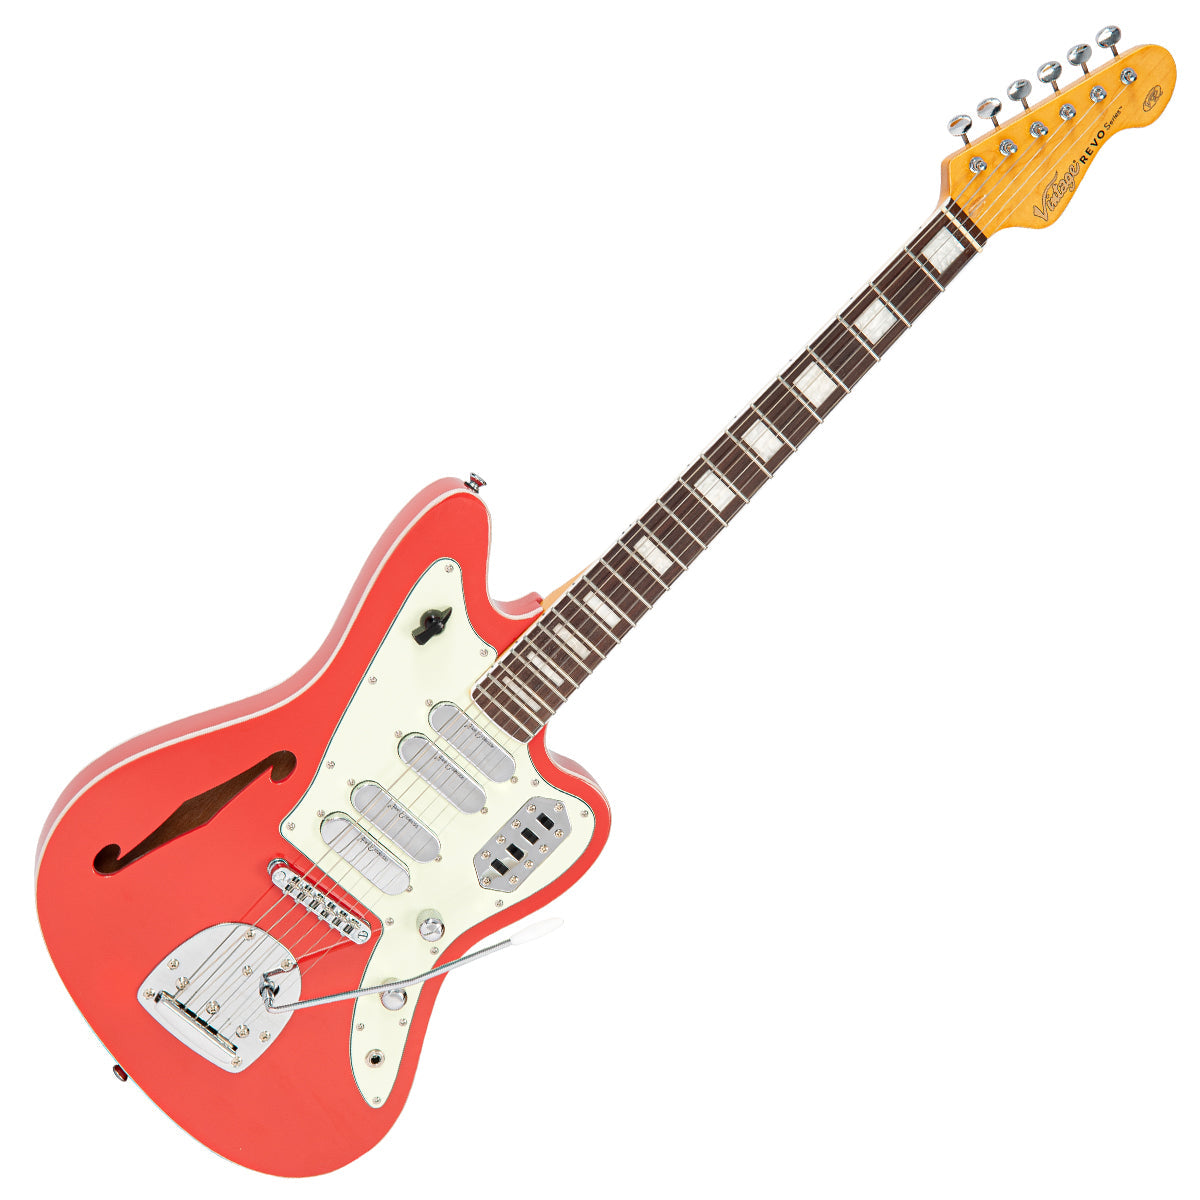 Vintage REVO Series 'Surfmaster Quad' Electric Guitar ~ Firenza Red, Electric Guitars for sale at Richards Guitars.